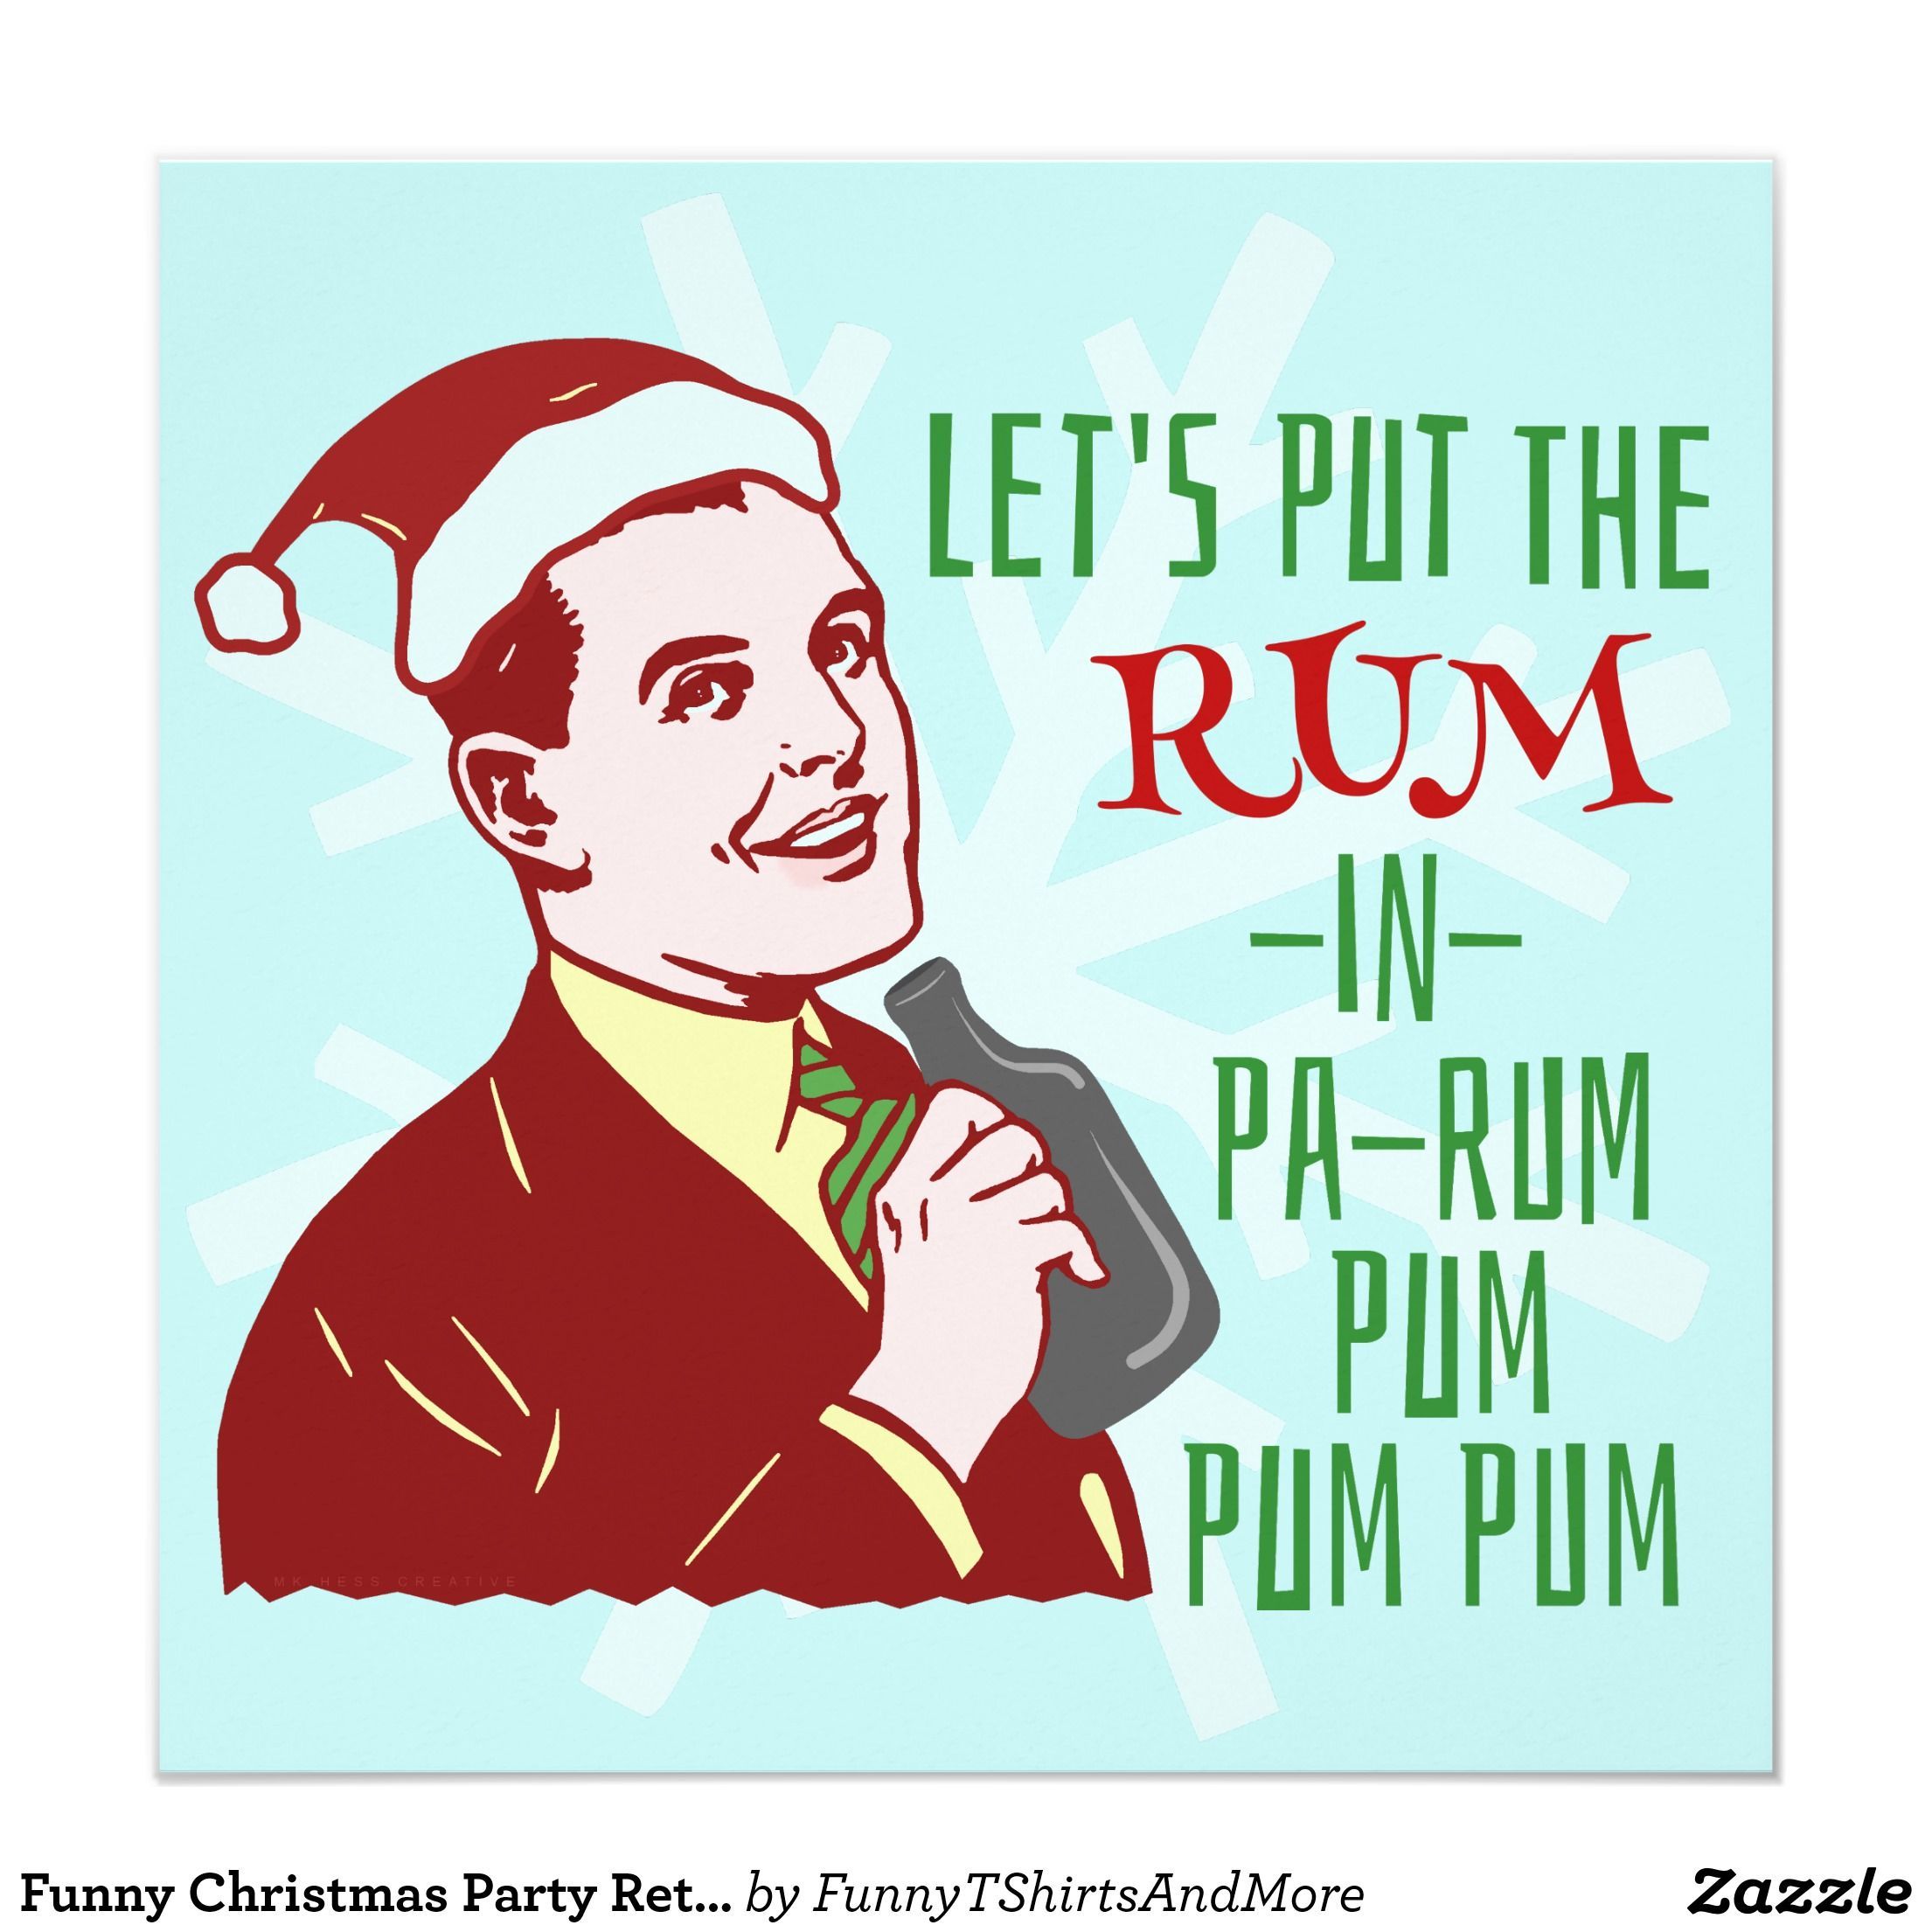 Funny Christmas Party Retro Rum Adult Holiday Invitation | Zazzle.com.au -   18 holiday Sayings parties ideas